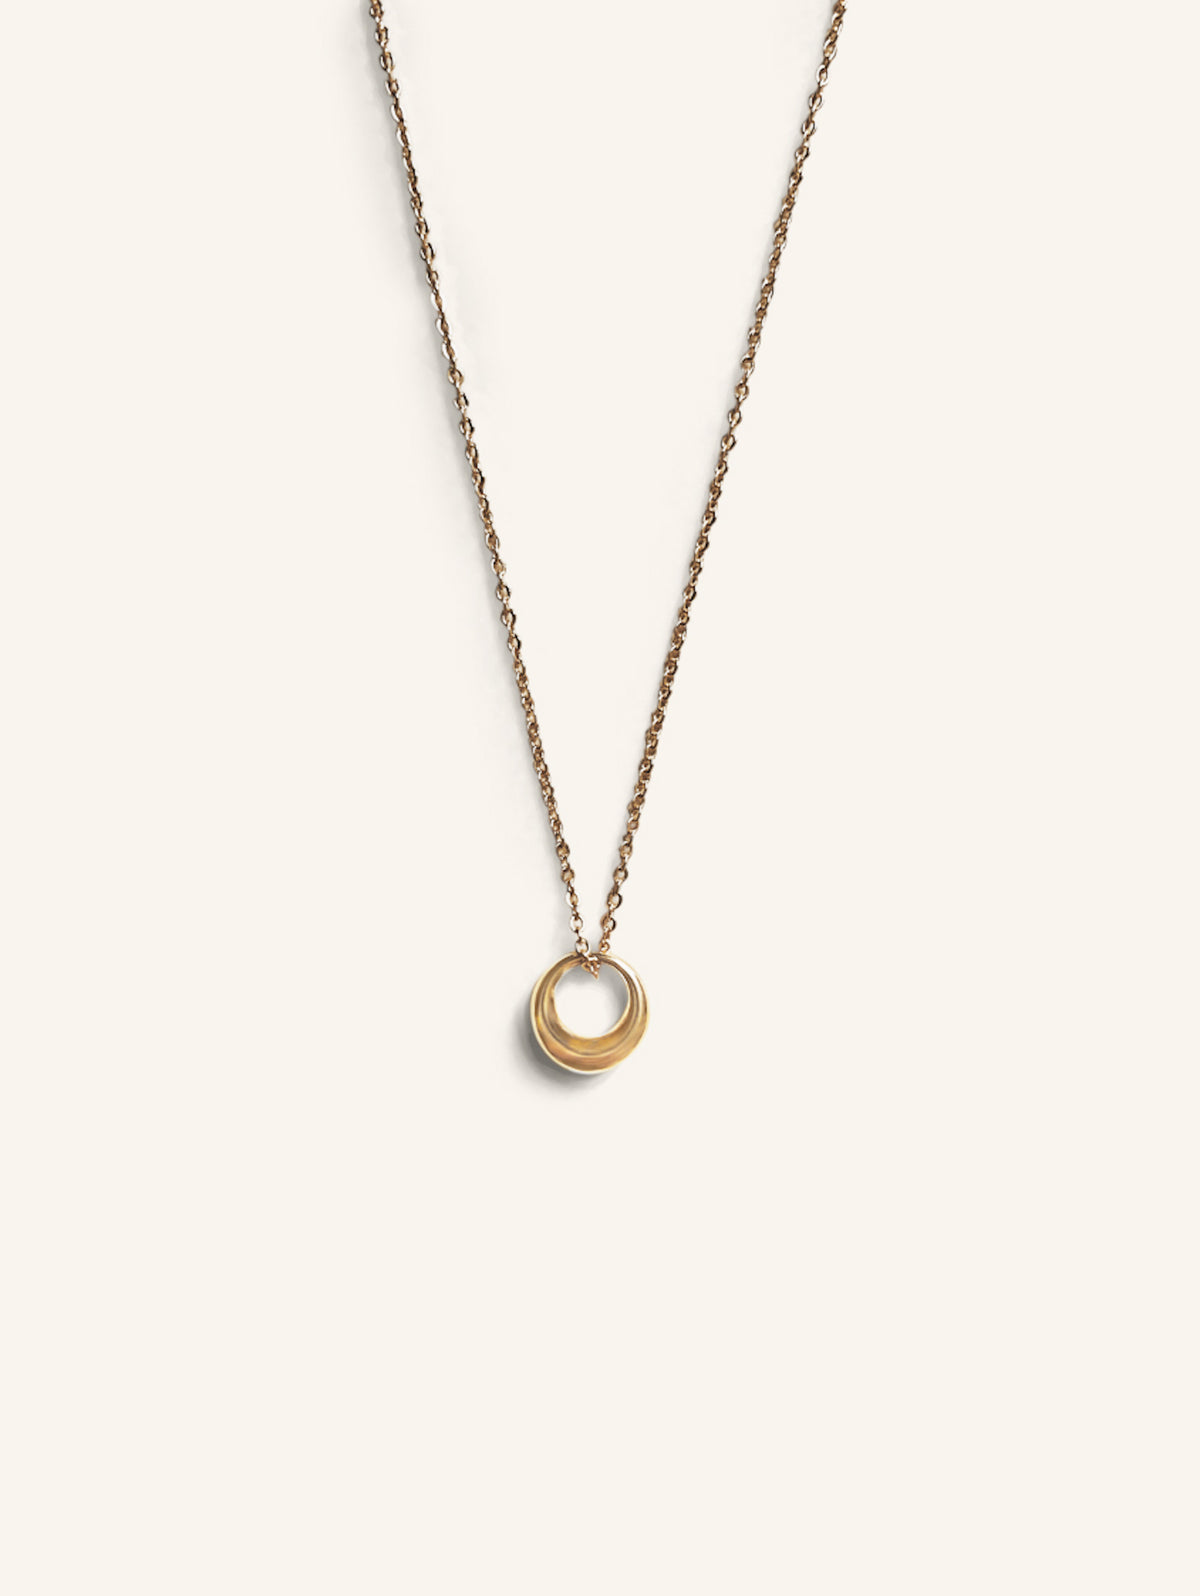 IVA CIRCLE NECKLACE